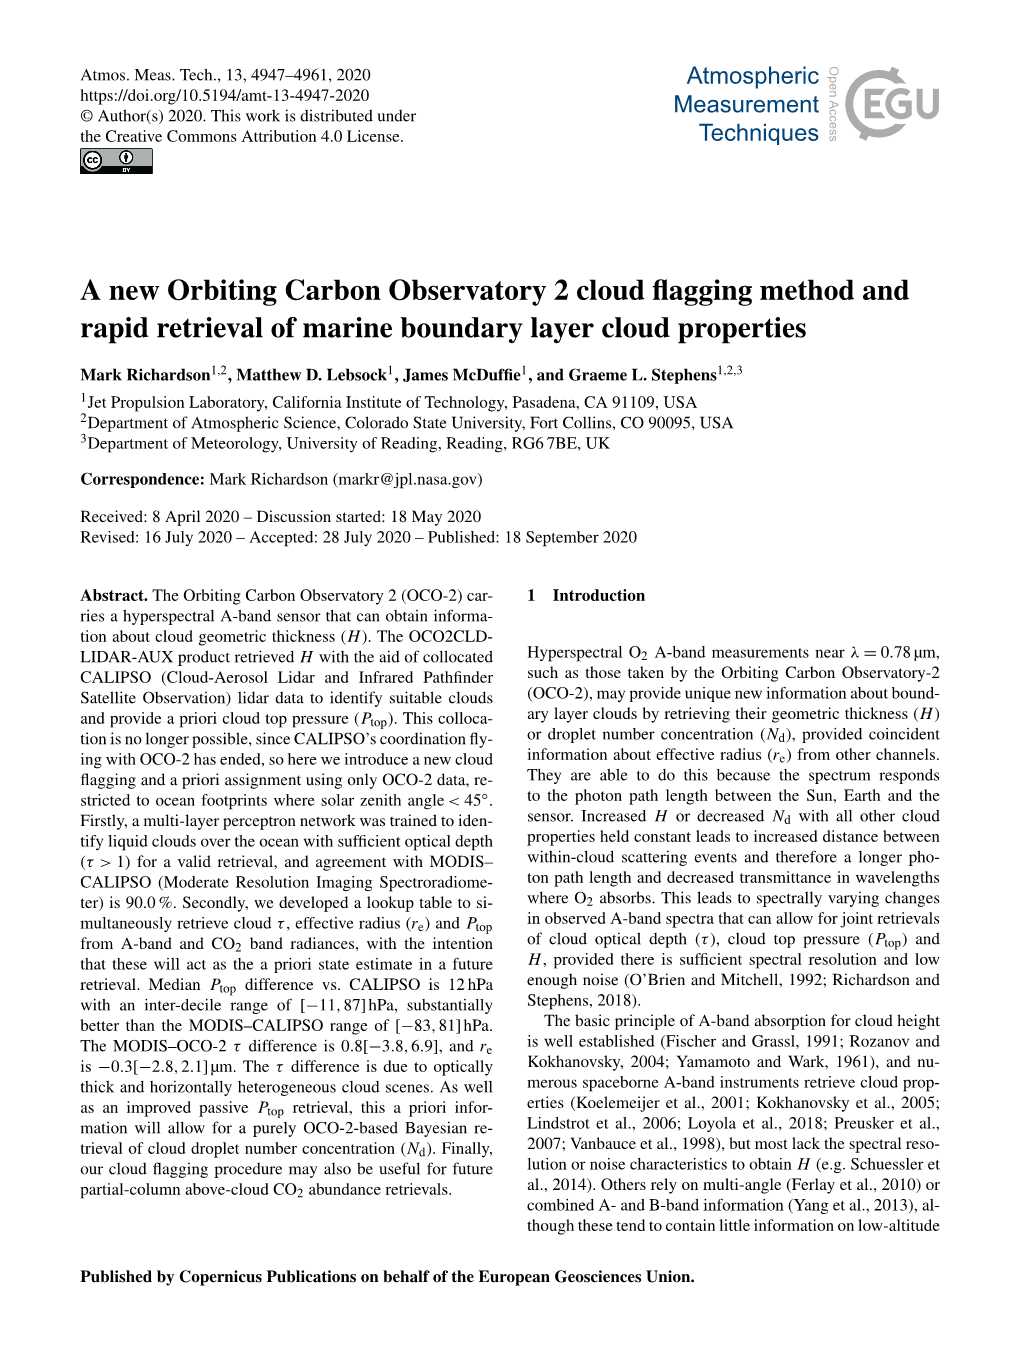 A New Orbiting Carbon Observatory 2 Cloud Flagging Method and Rapid